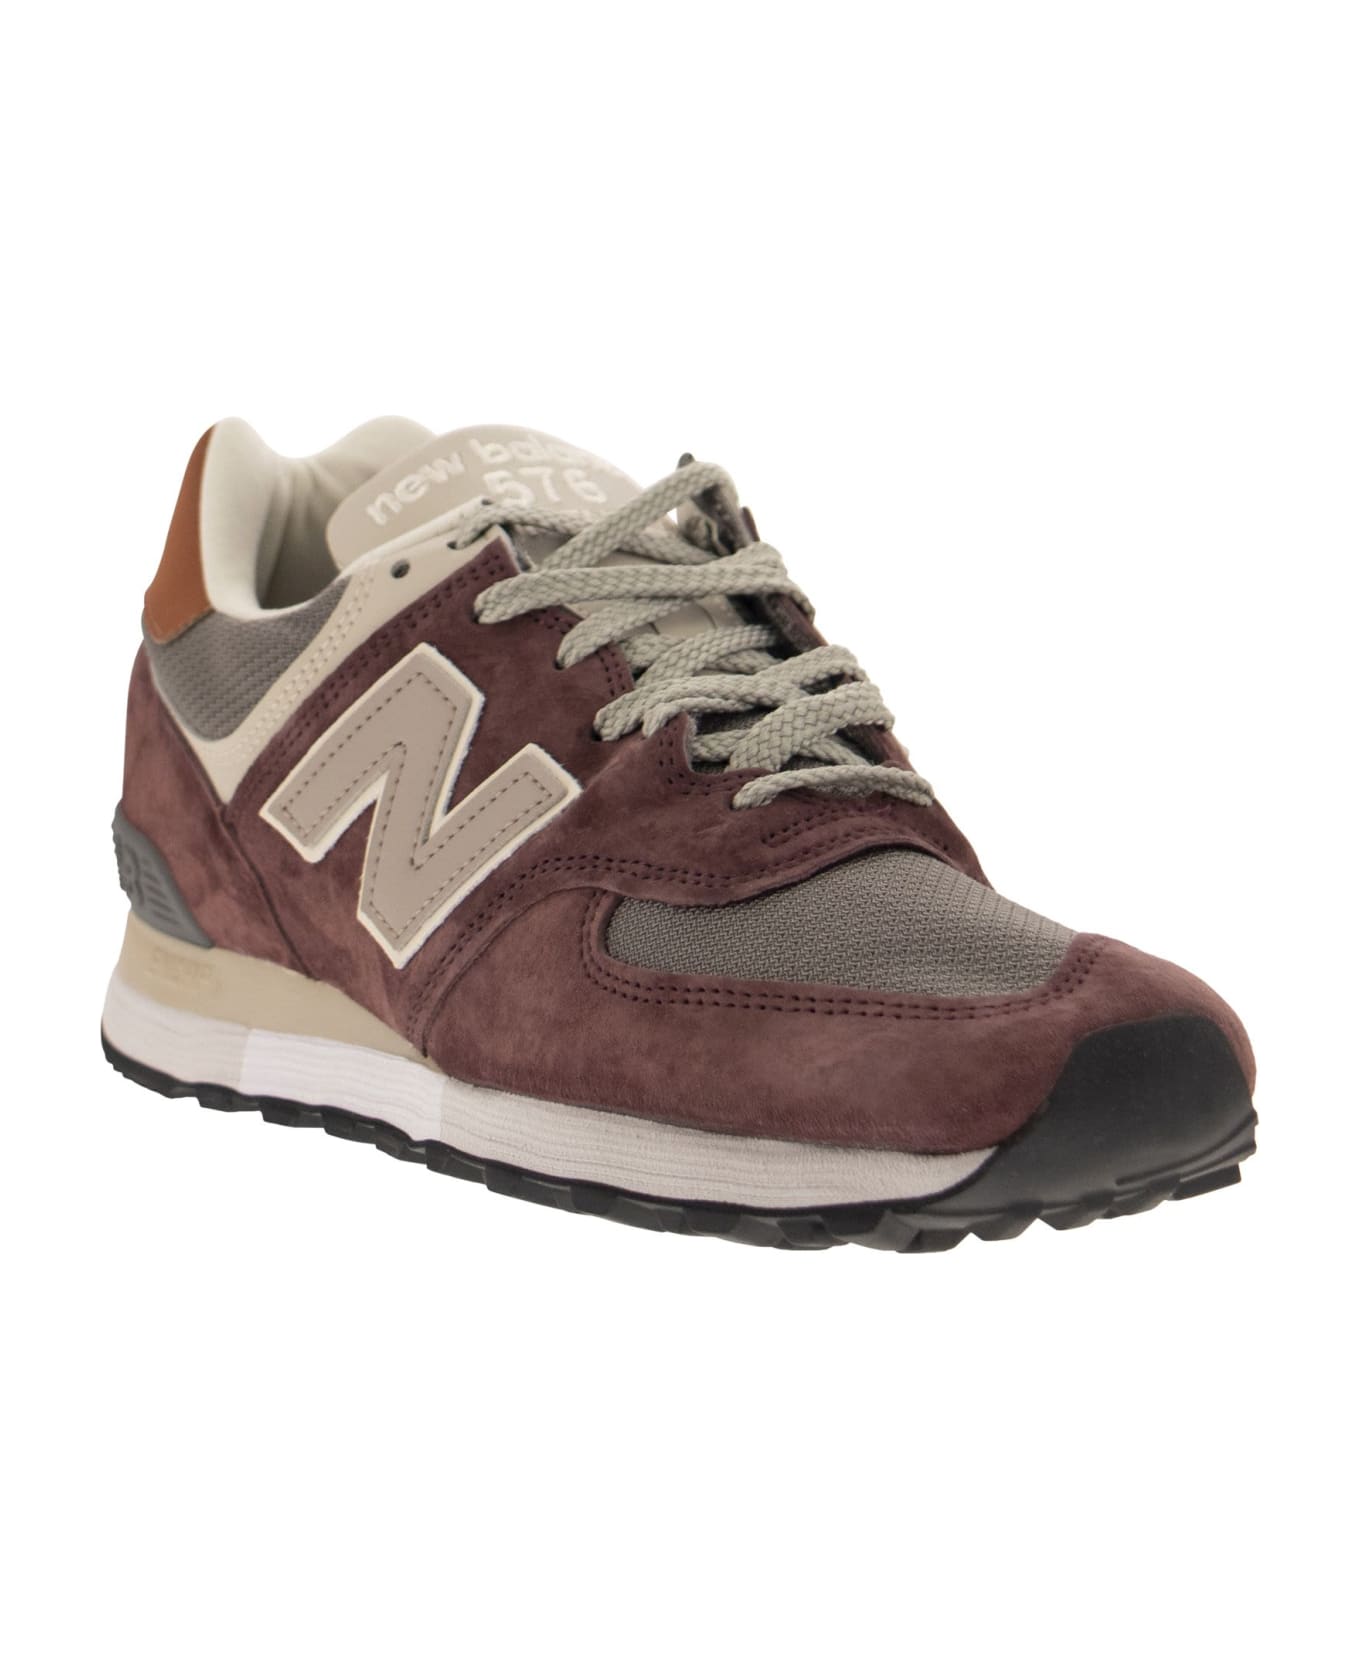 New Balance 576 - Sneakers - RED スニーカー